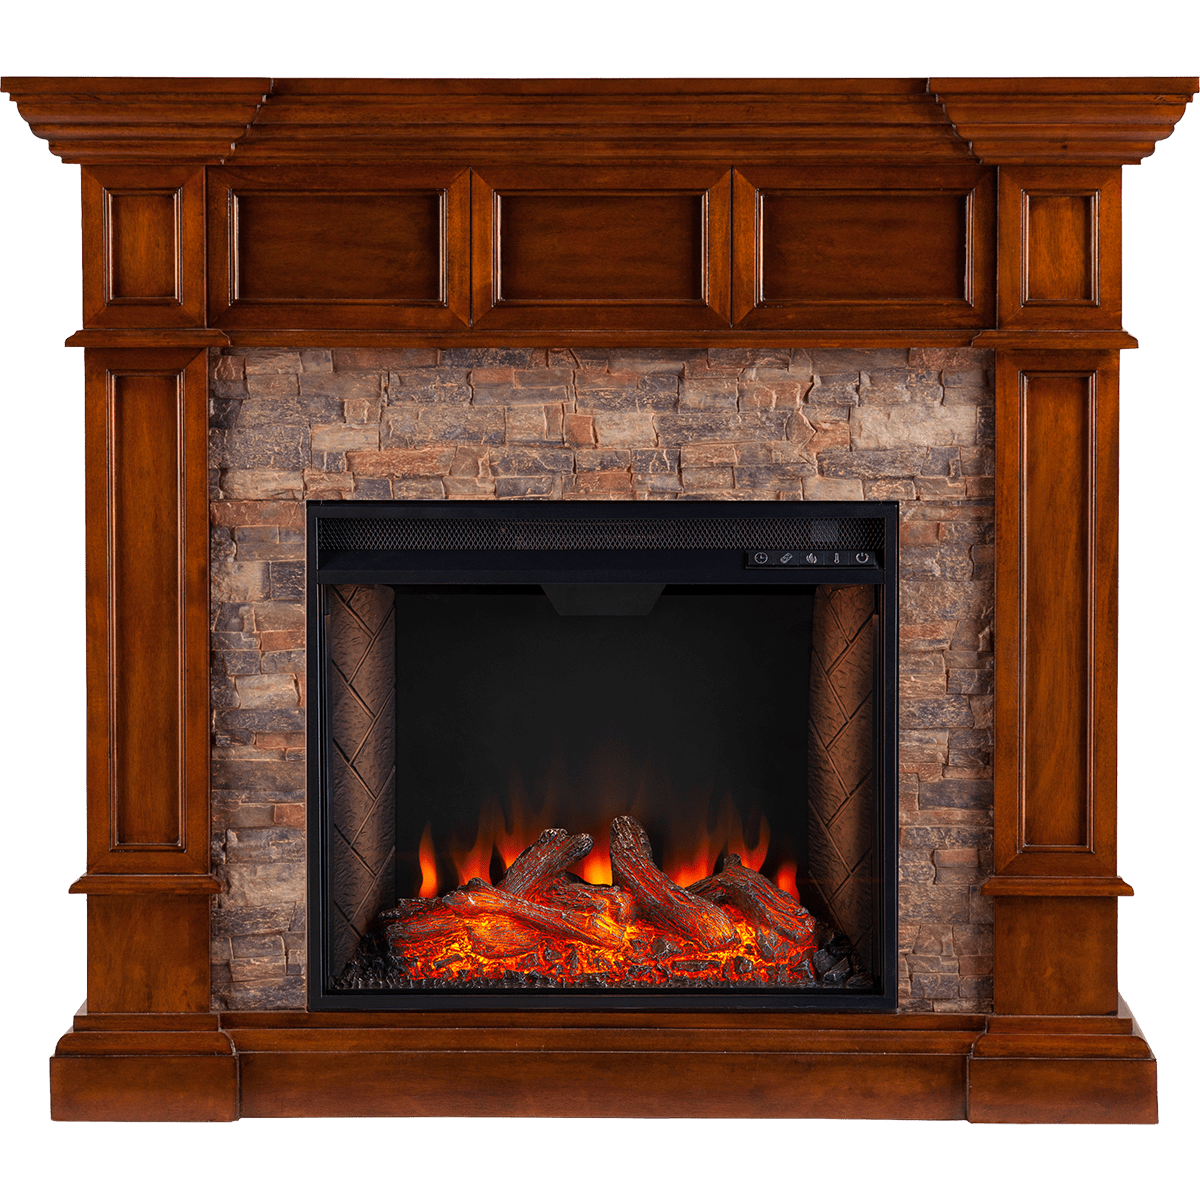 Best Electric Fireplace Logs Beautiful southern Enterprises Merrimack Simulated Stone Convertible Electric Fireplace